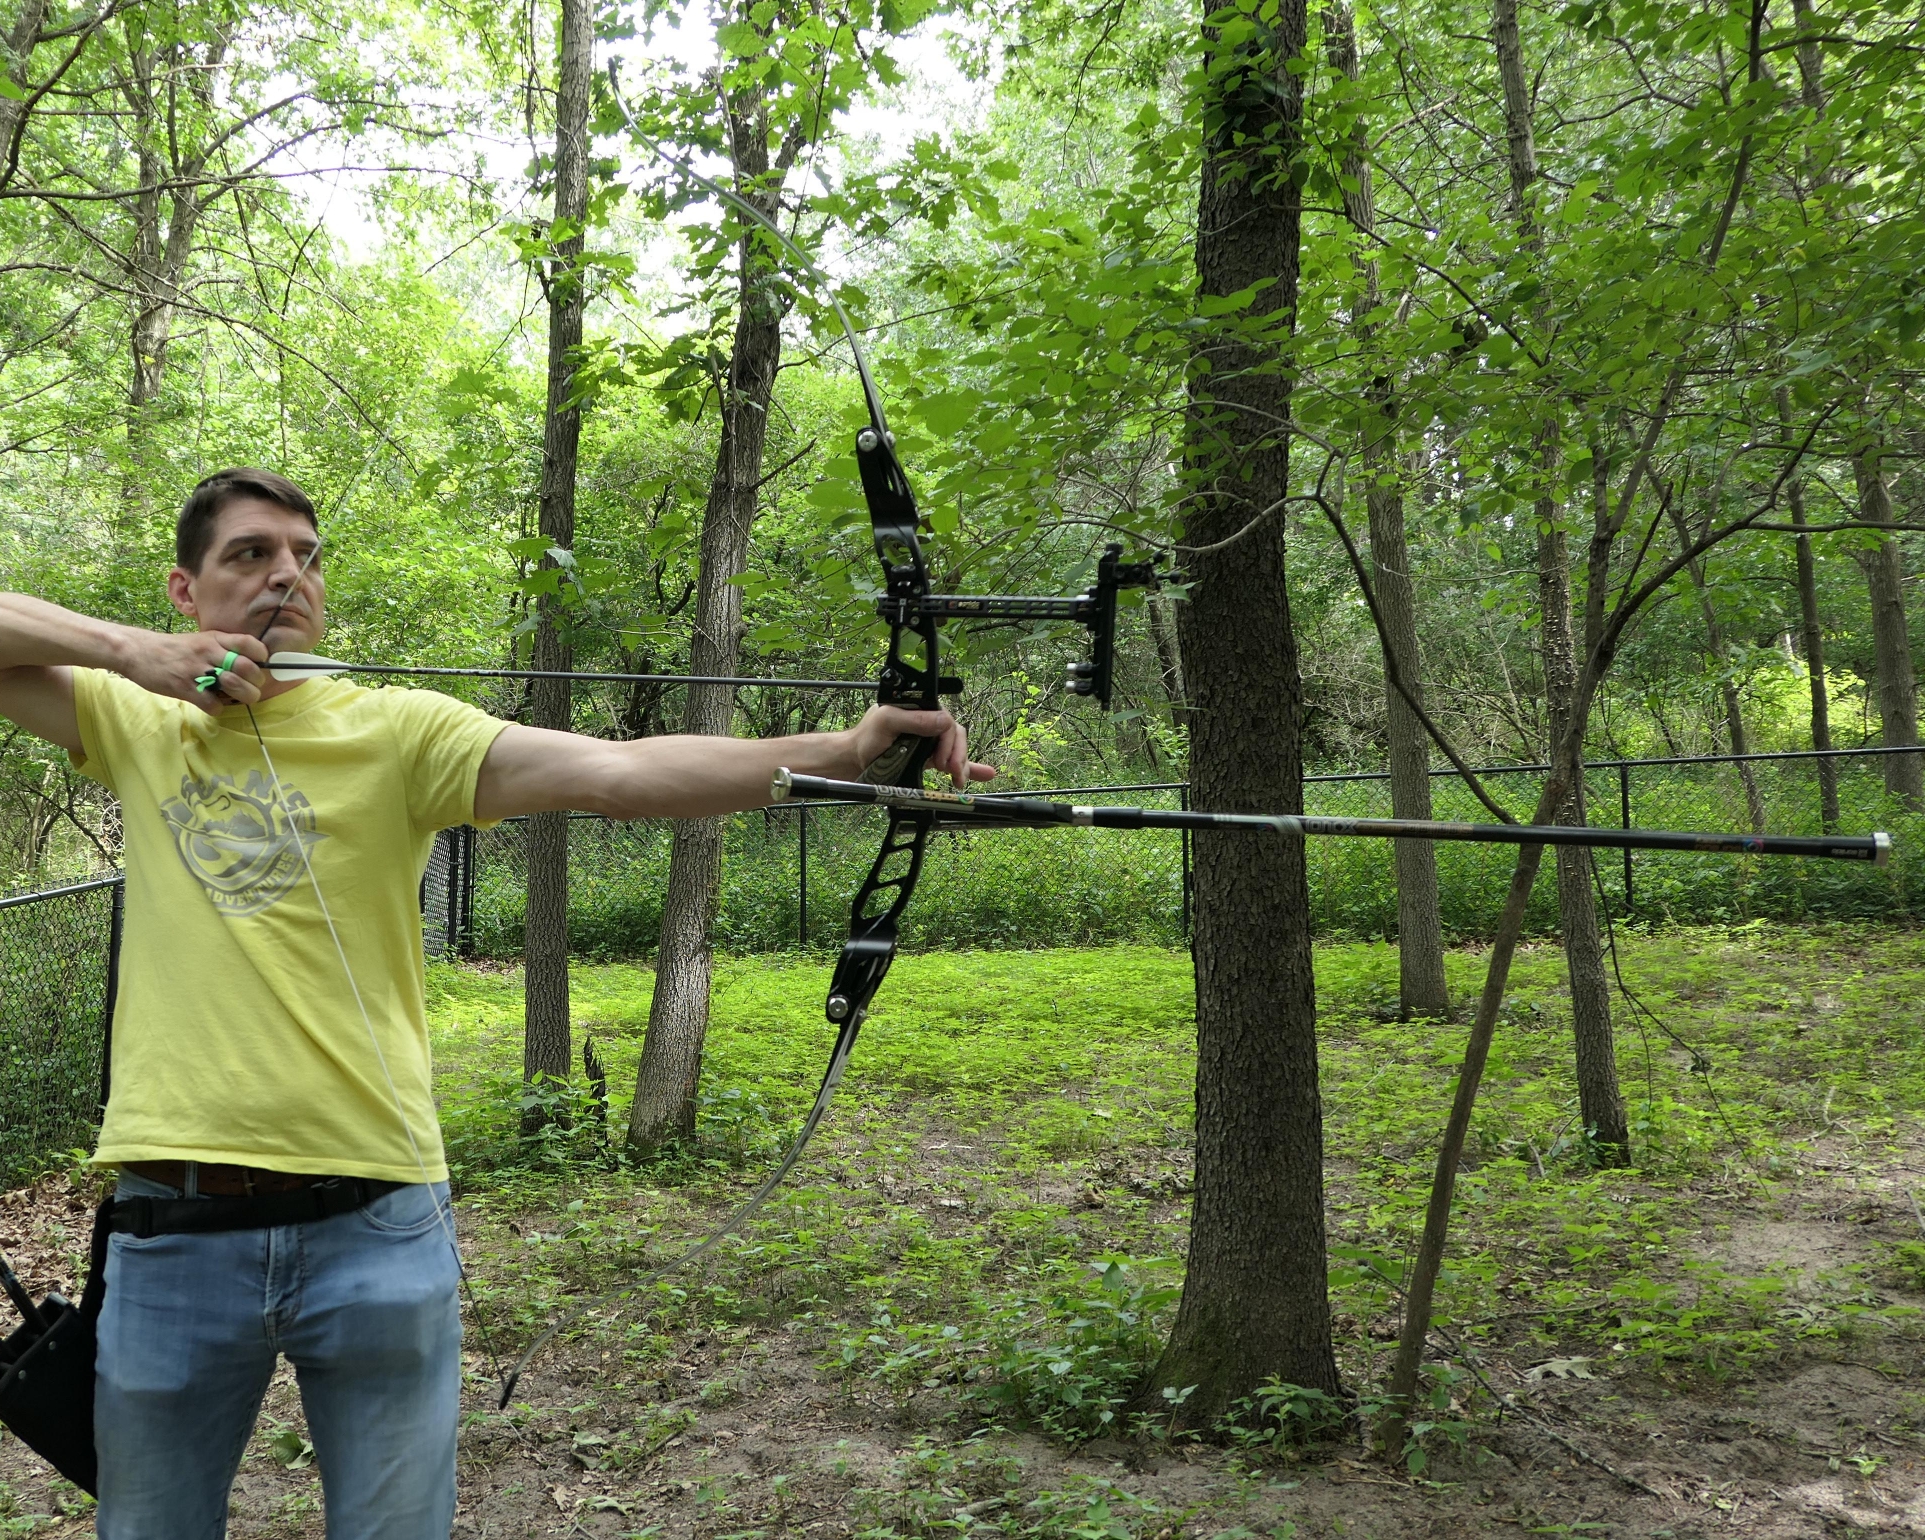 Olympic Recurve Bow Miracle X10 review Video by Sean , USA